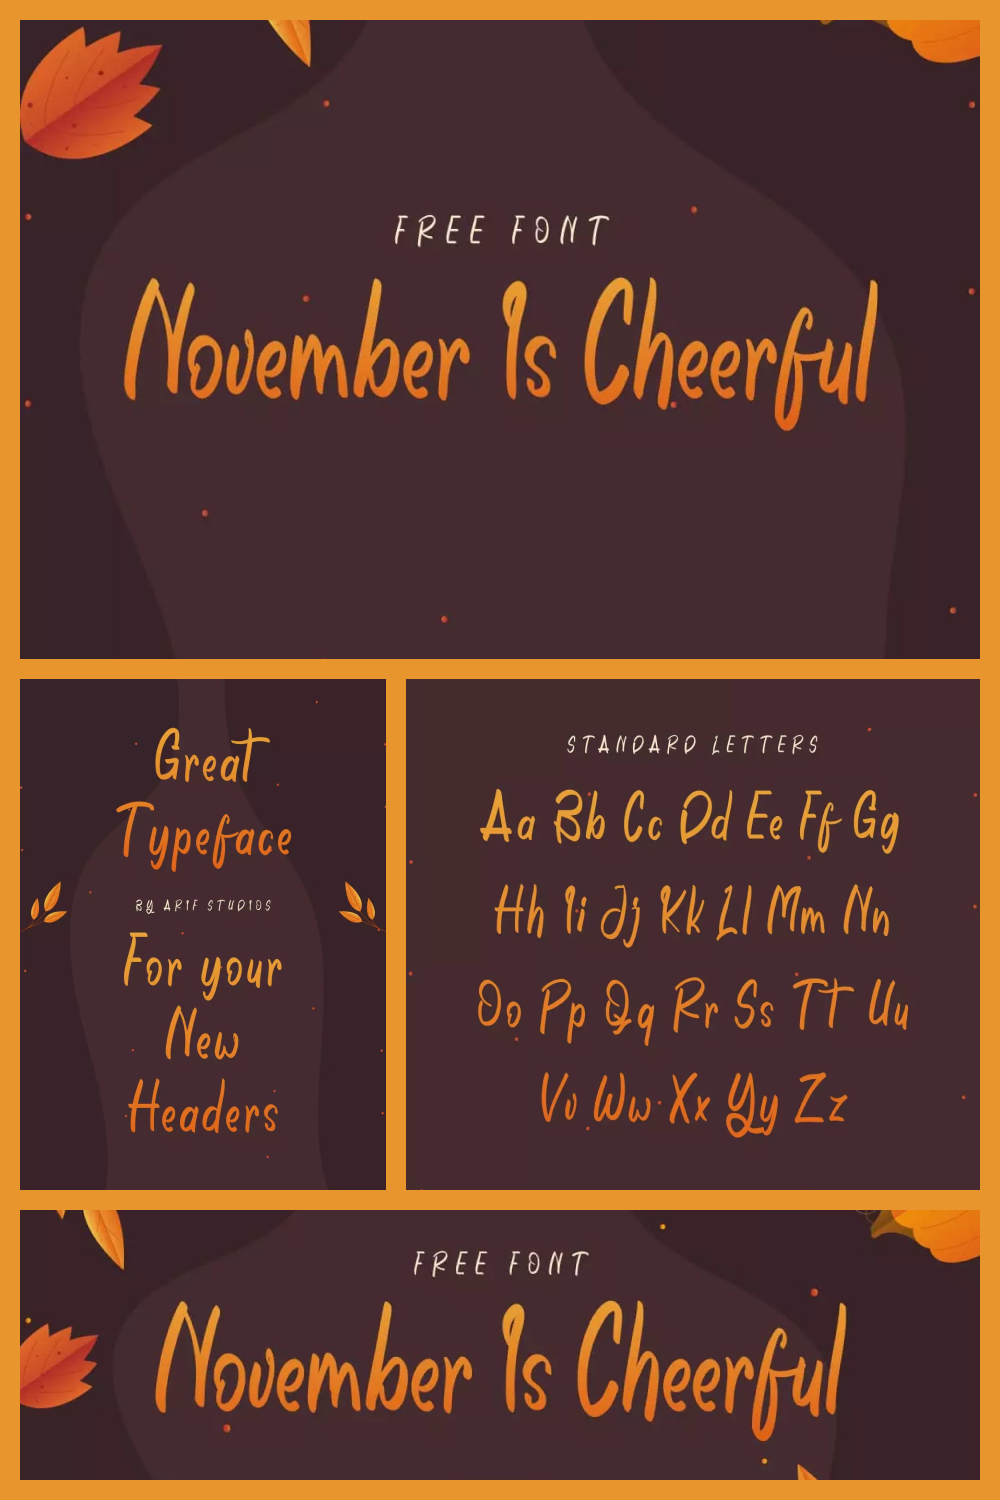 Free Font November Is Cheerful.